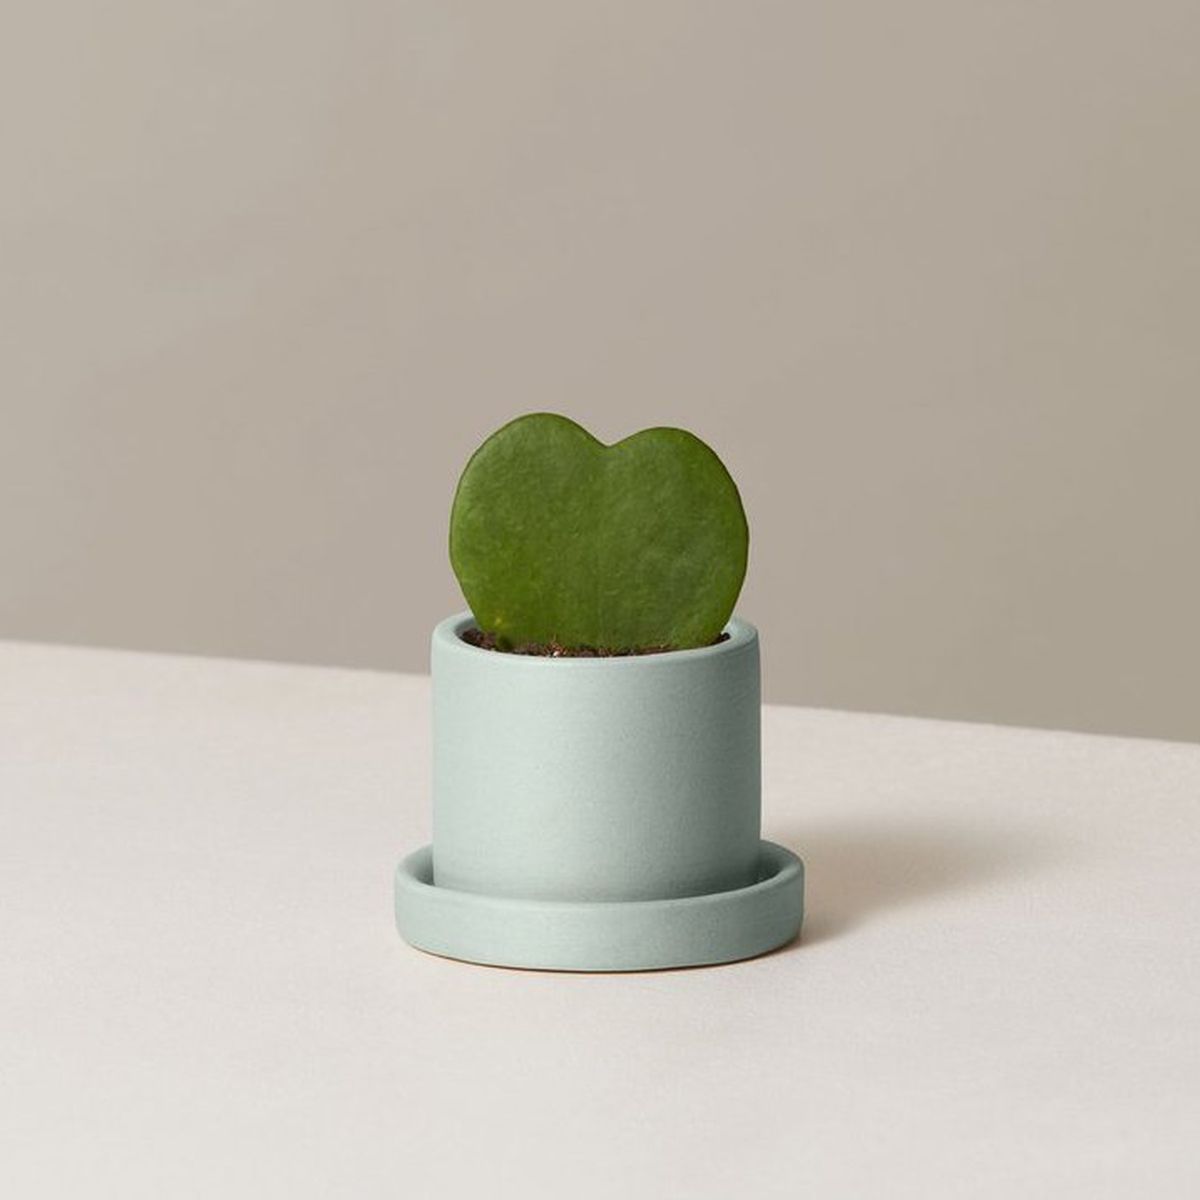 Small mint planter with a heart-shaped plant.